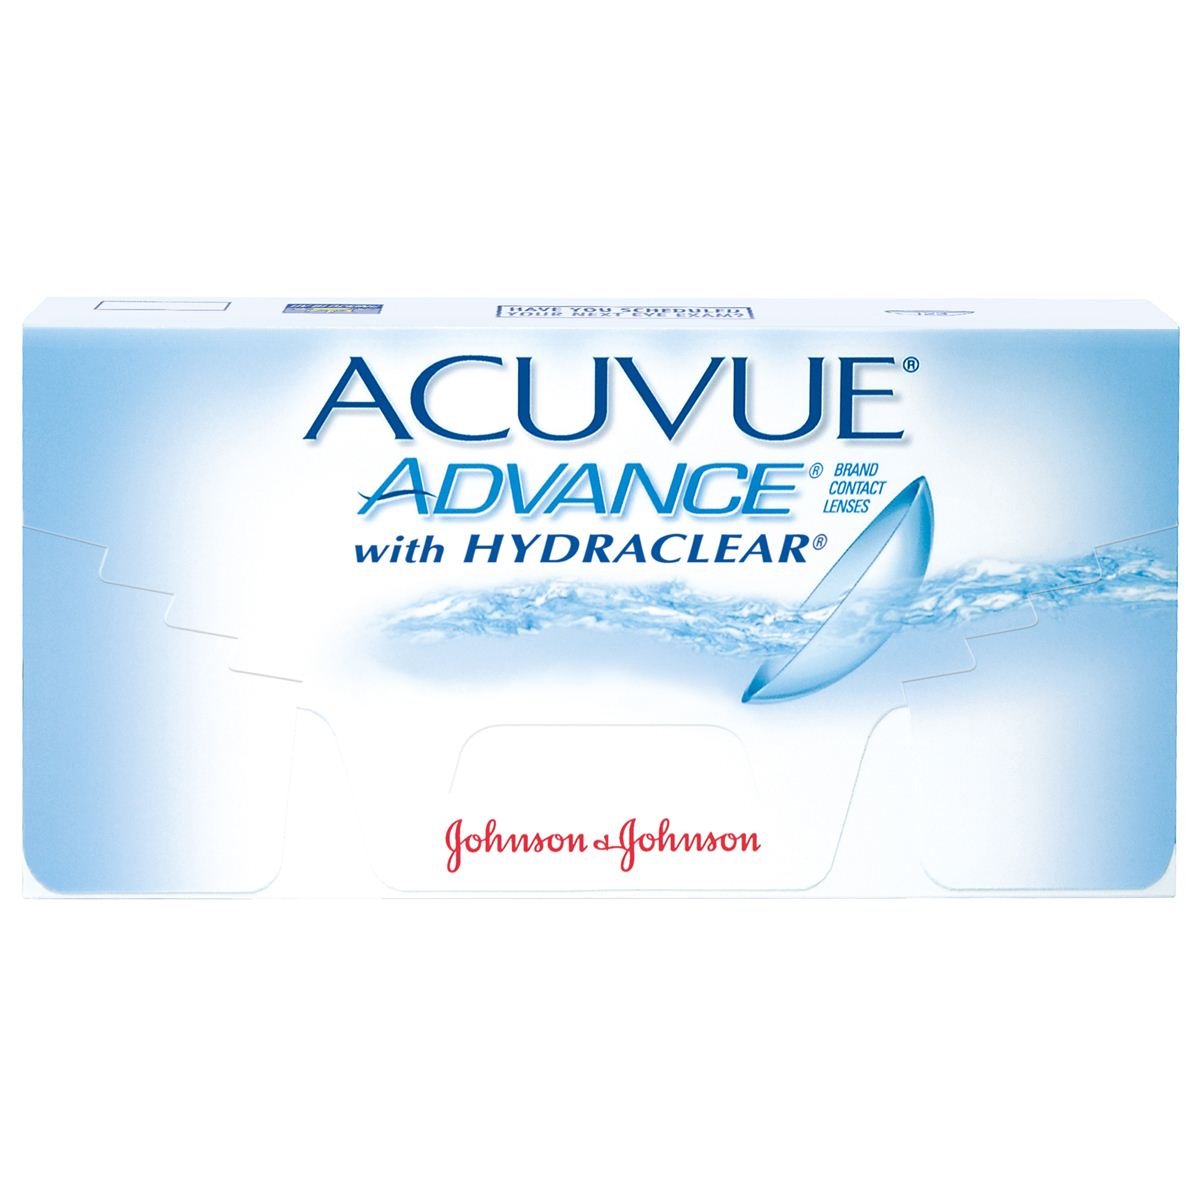 Acuvue Advance 8.7 14.0 -5.75